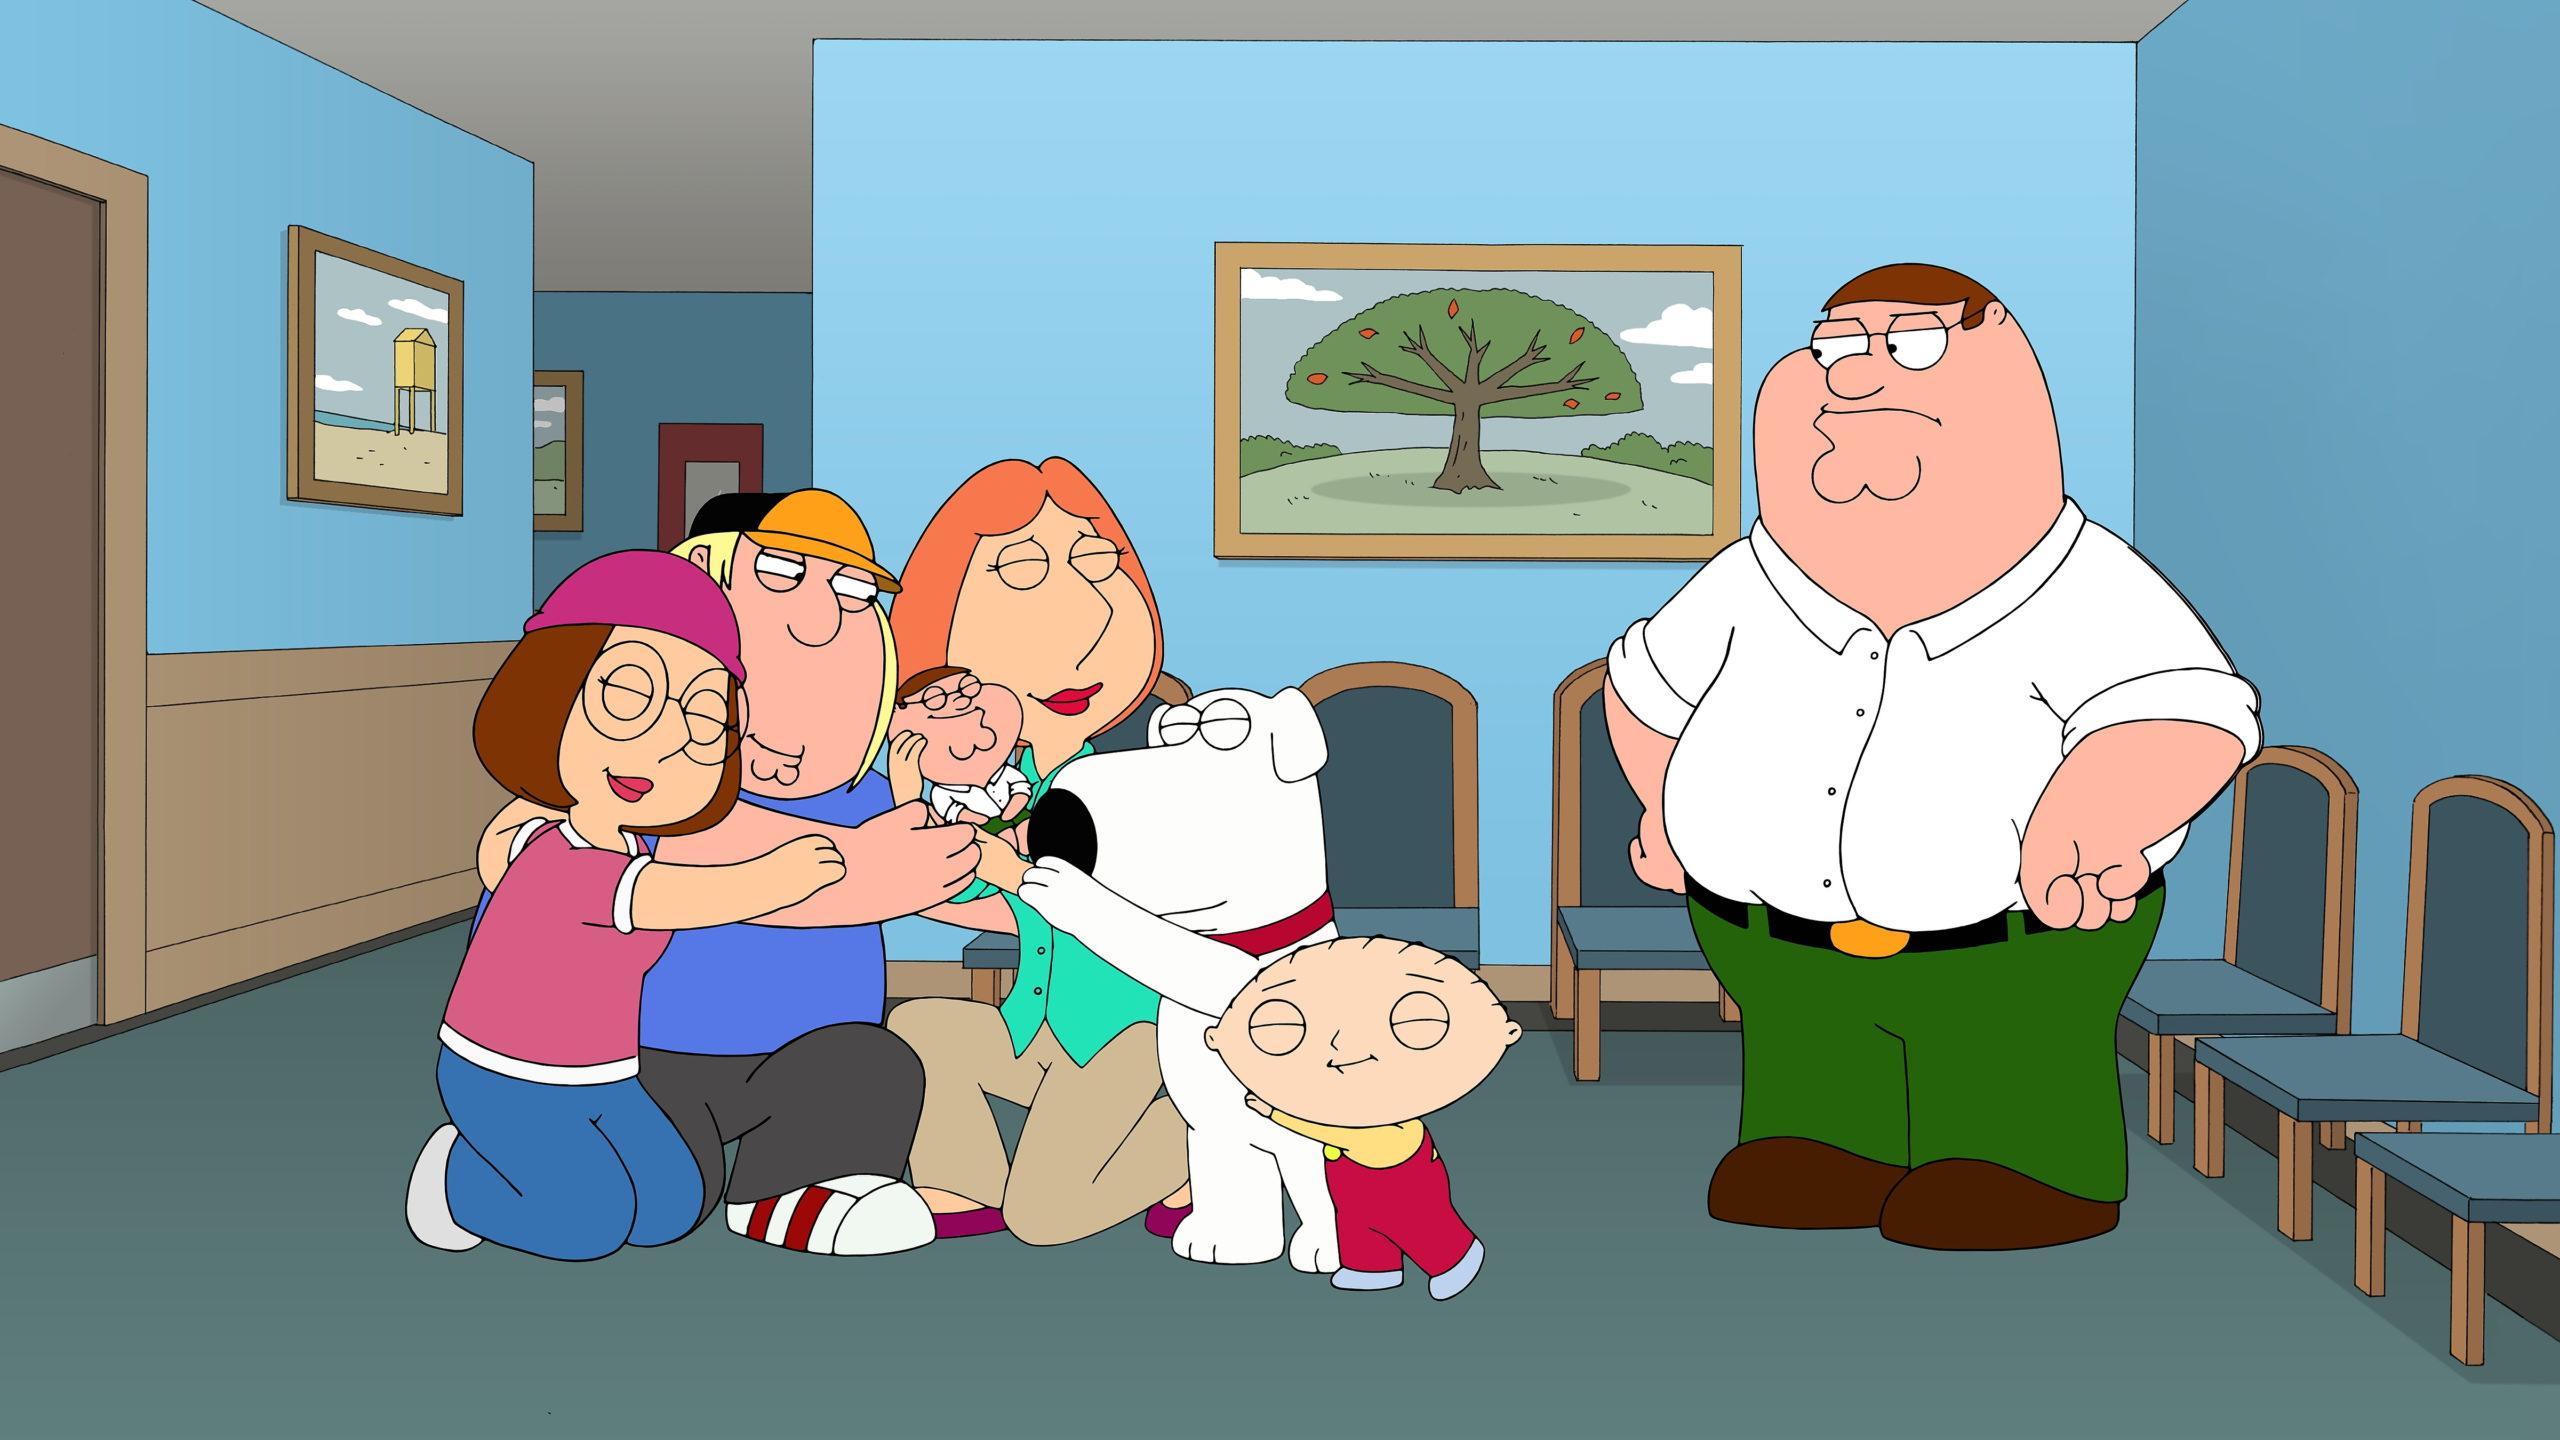 UPDATED REVIEW: Is Fox's Family Guy crass? 